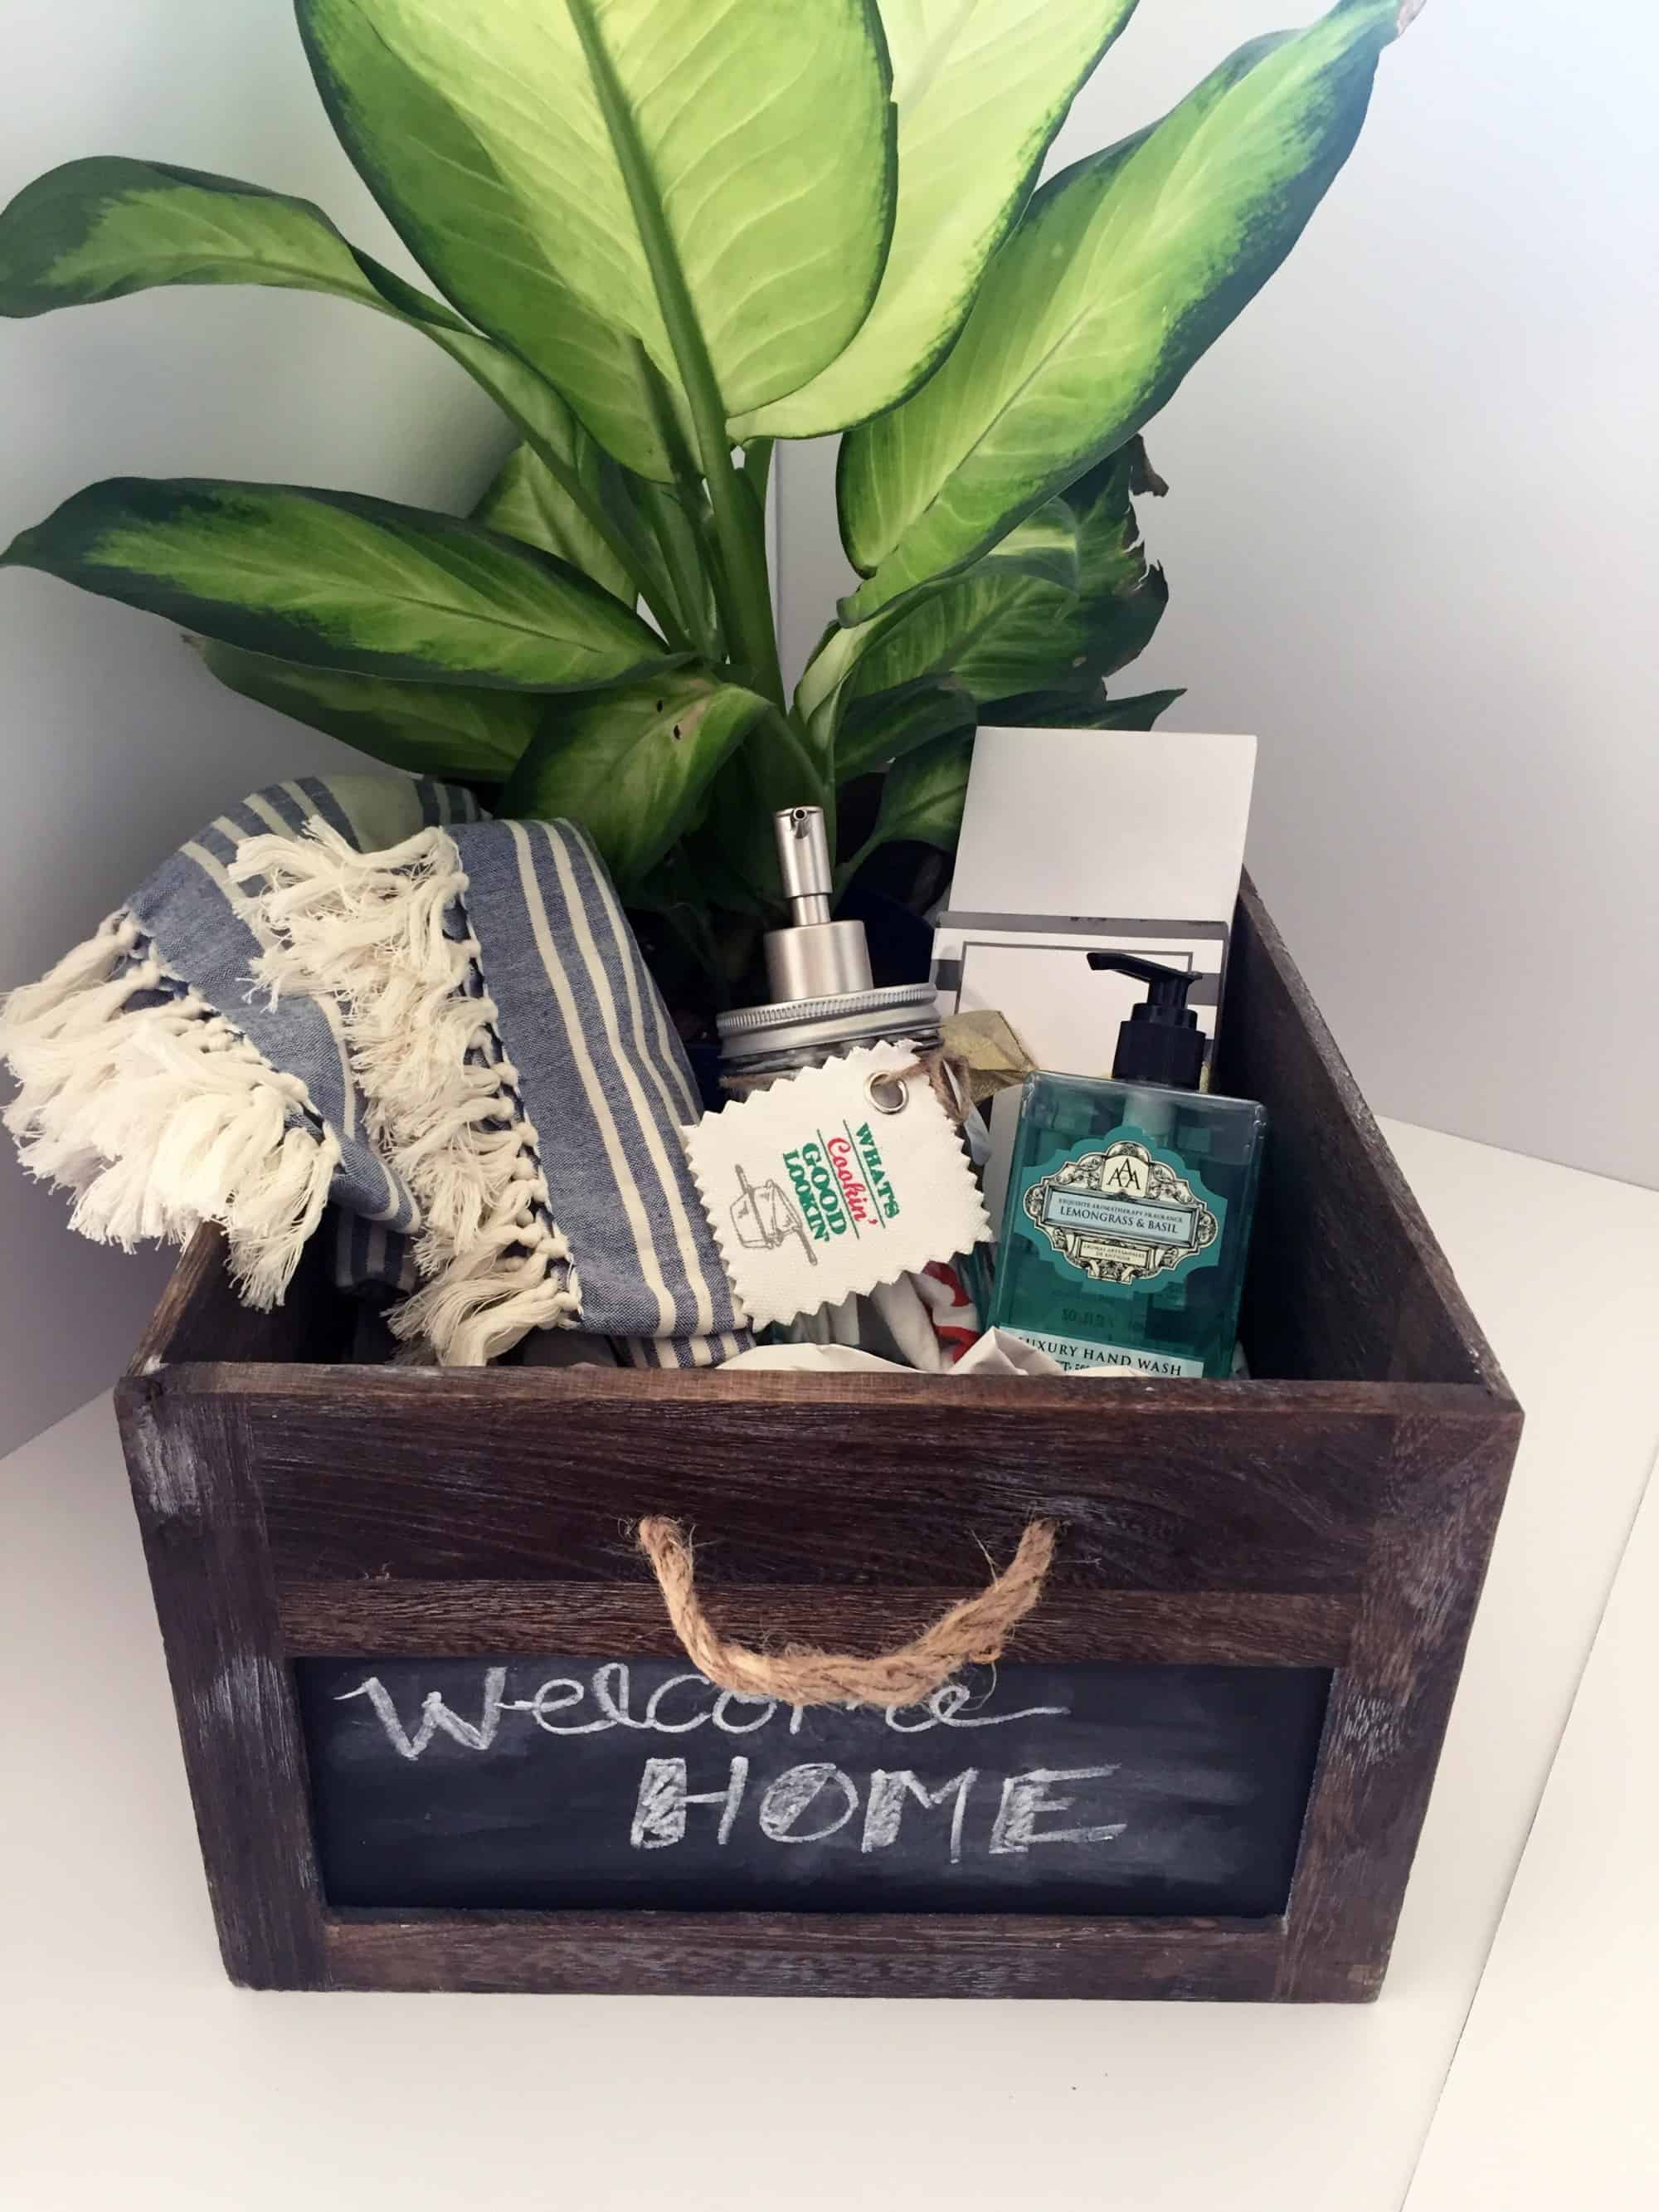 Packed housewarming gift crate